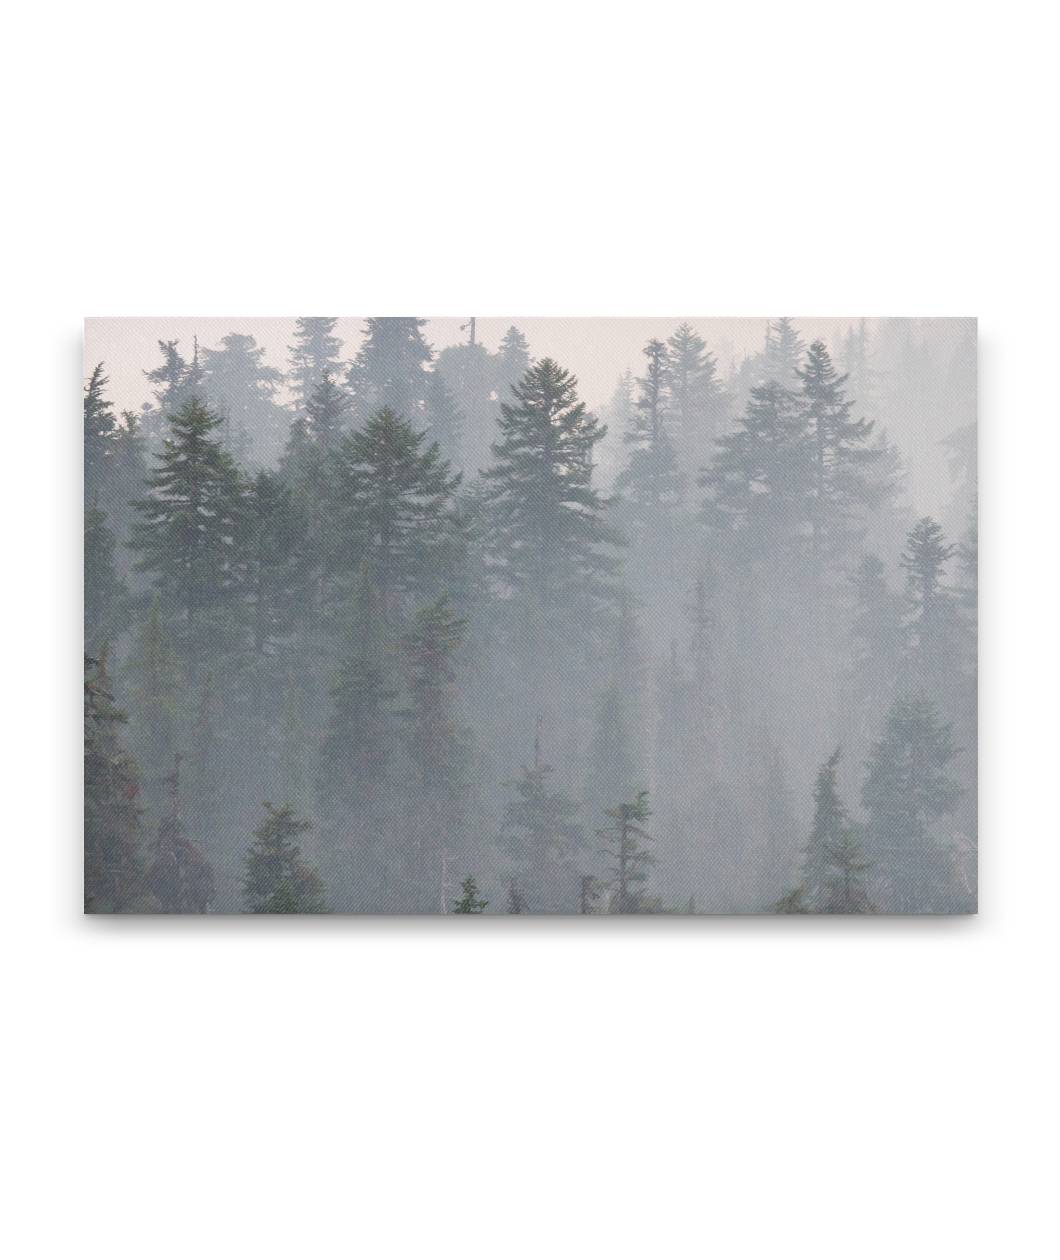 Forest and Wildfire Smoke, Willamette National Forest, Oregon